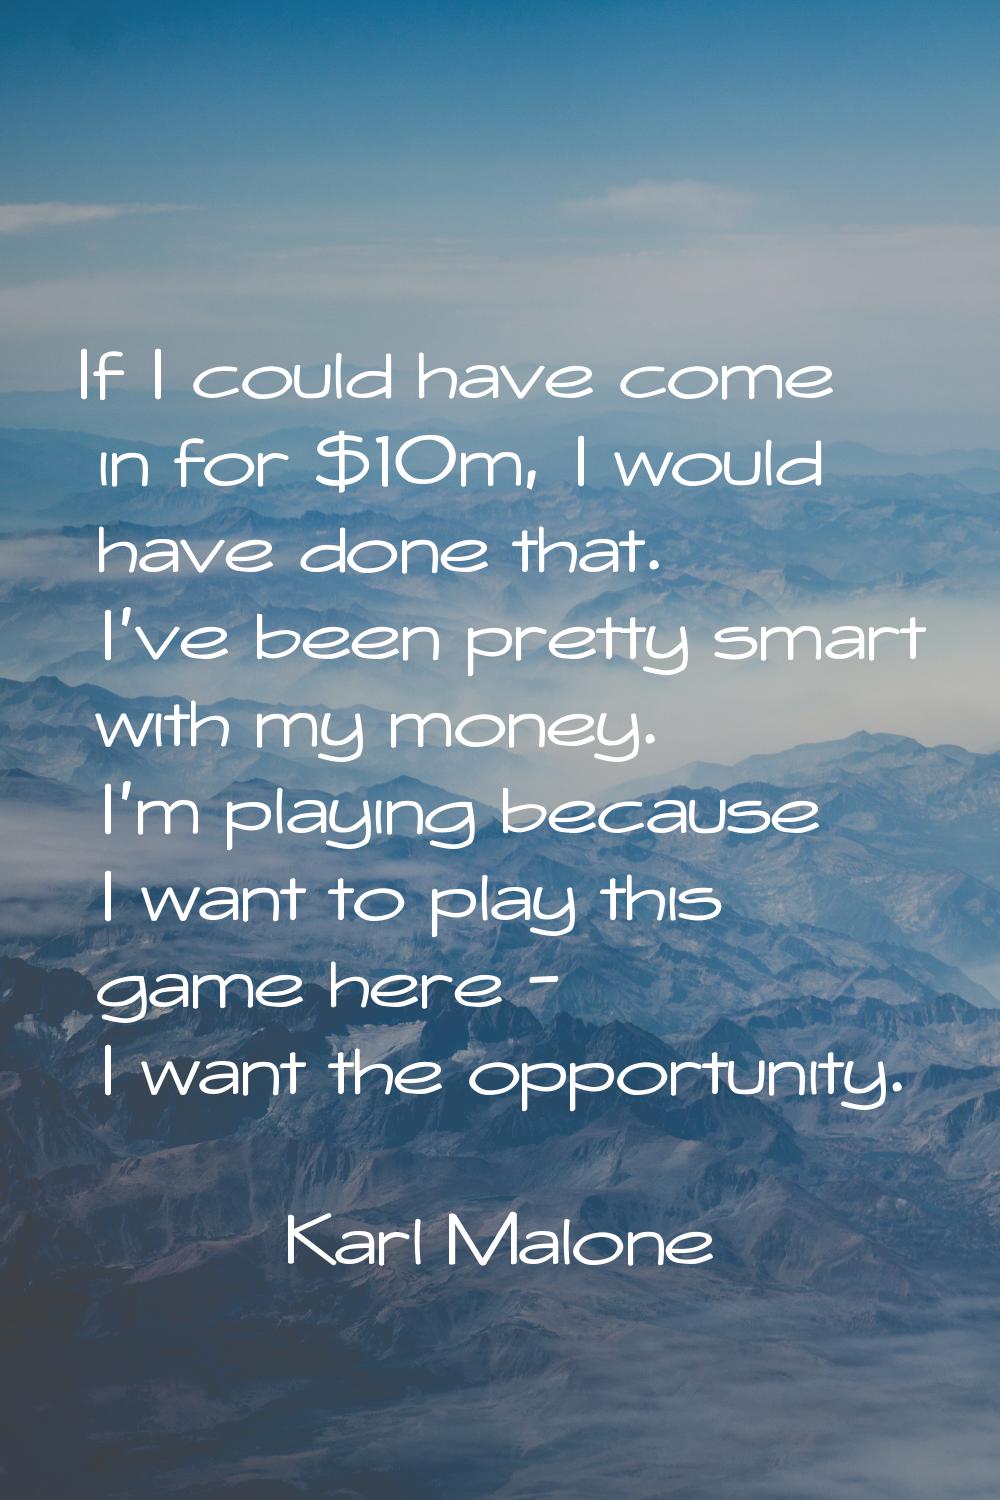 If I could have come in for $10m, I would have done that. I've been pretty smart with my money. I'm